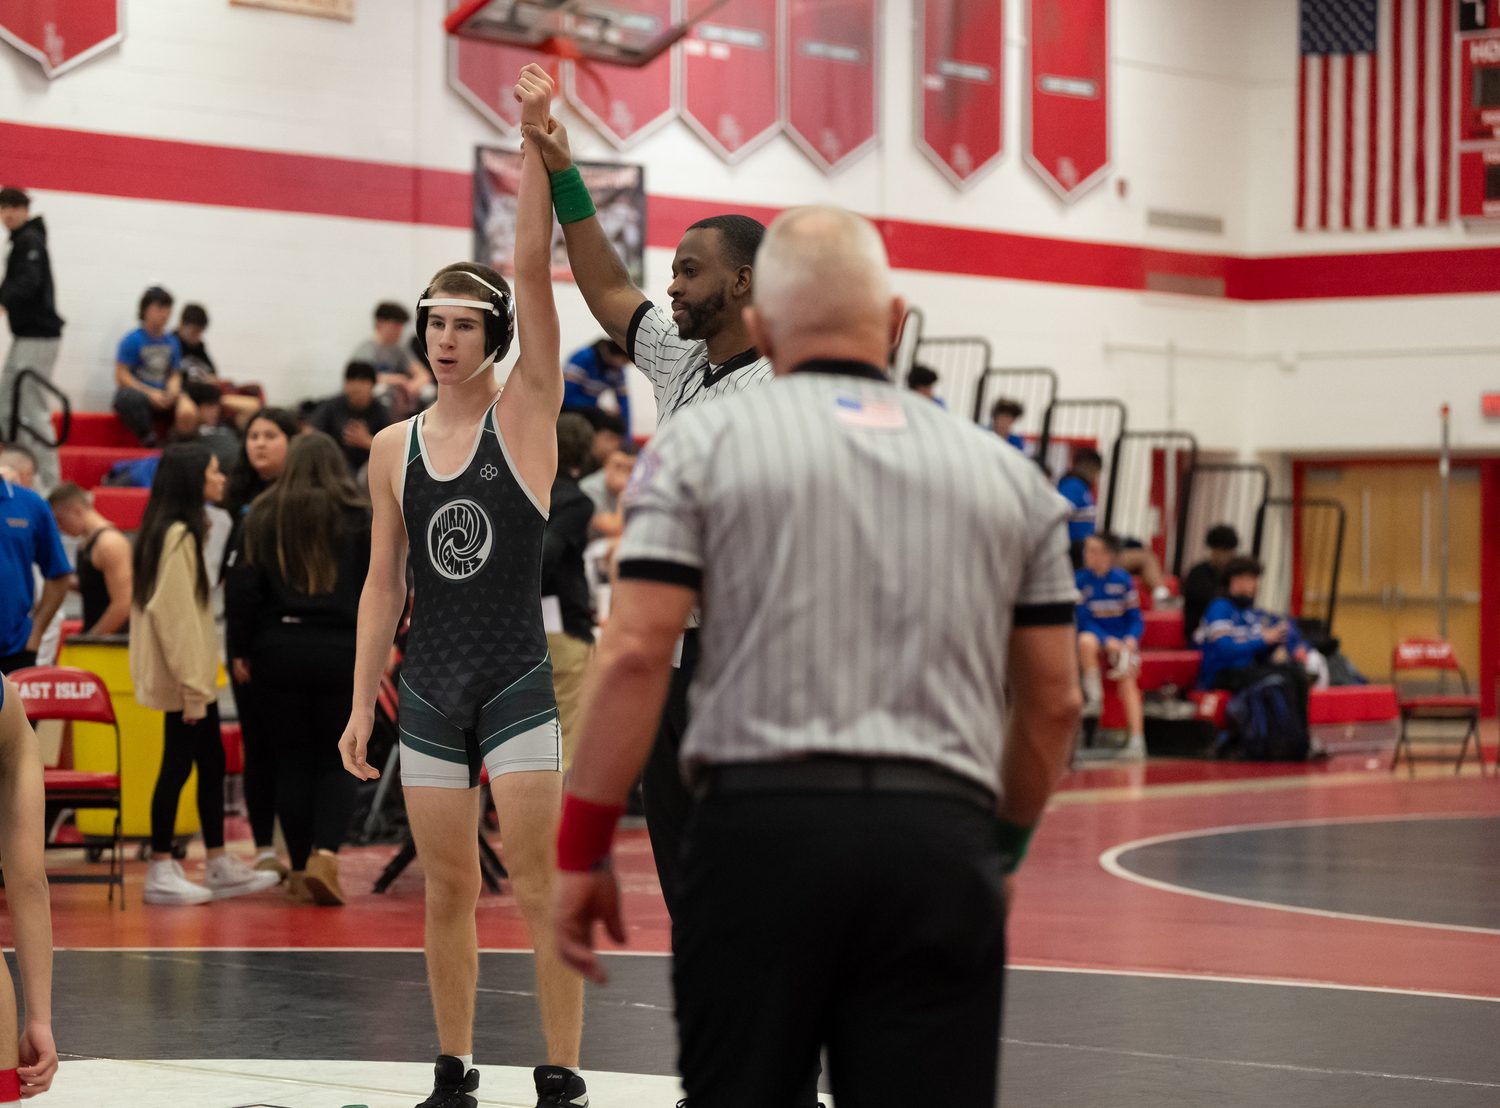 Tadhg Green gets his arm raised after winning his first round match on Saturday. RON ESPOSITO